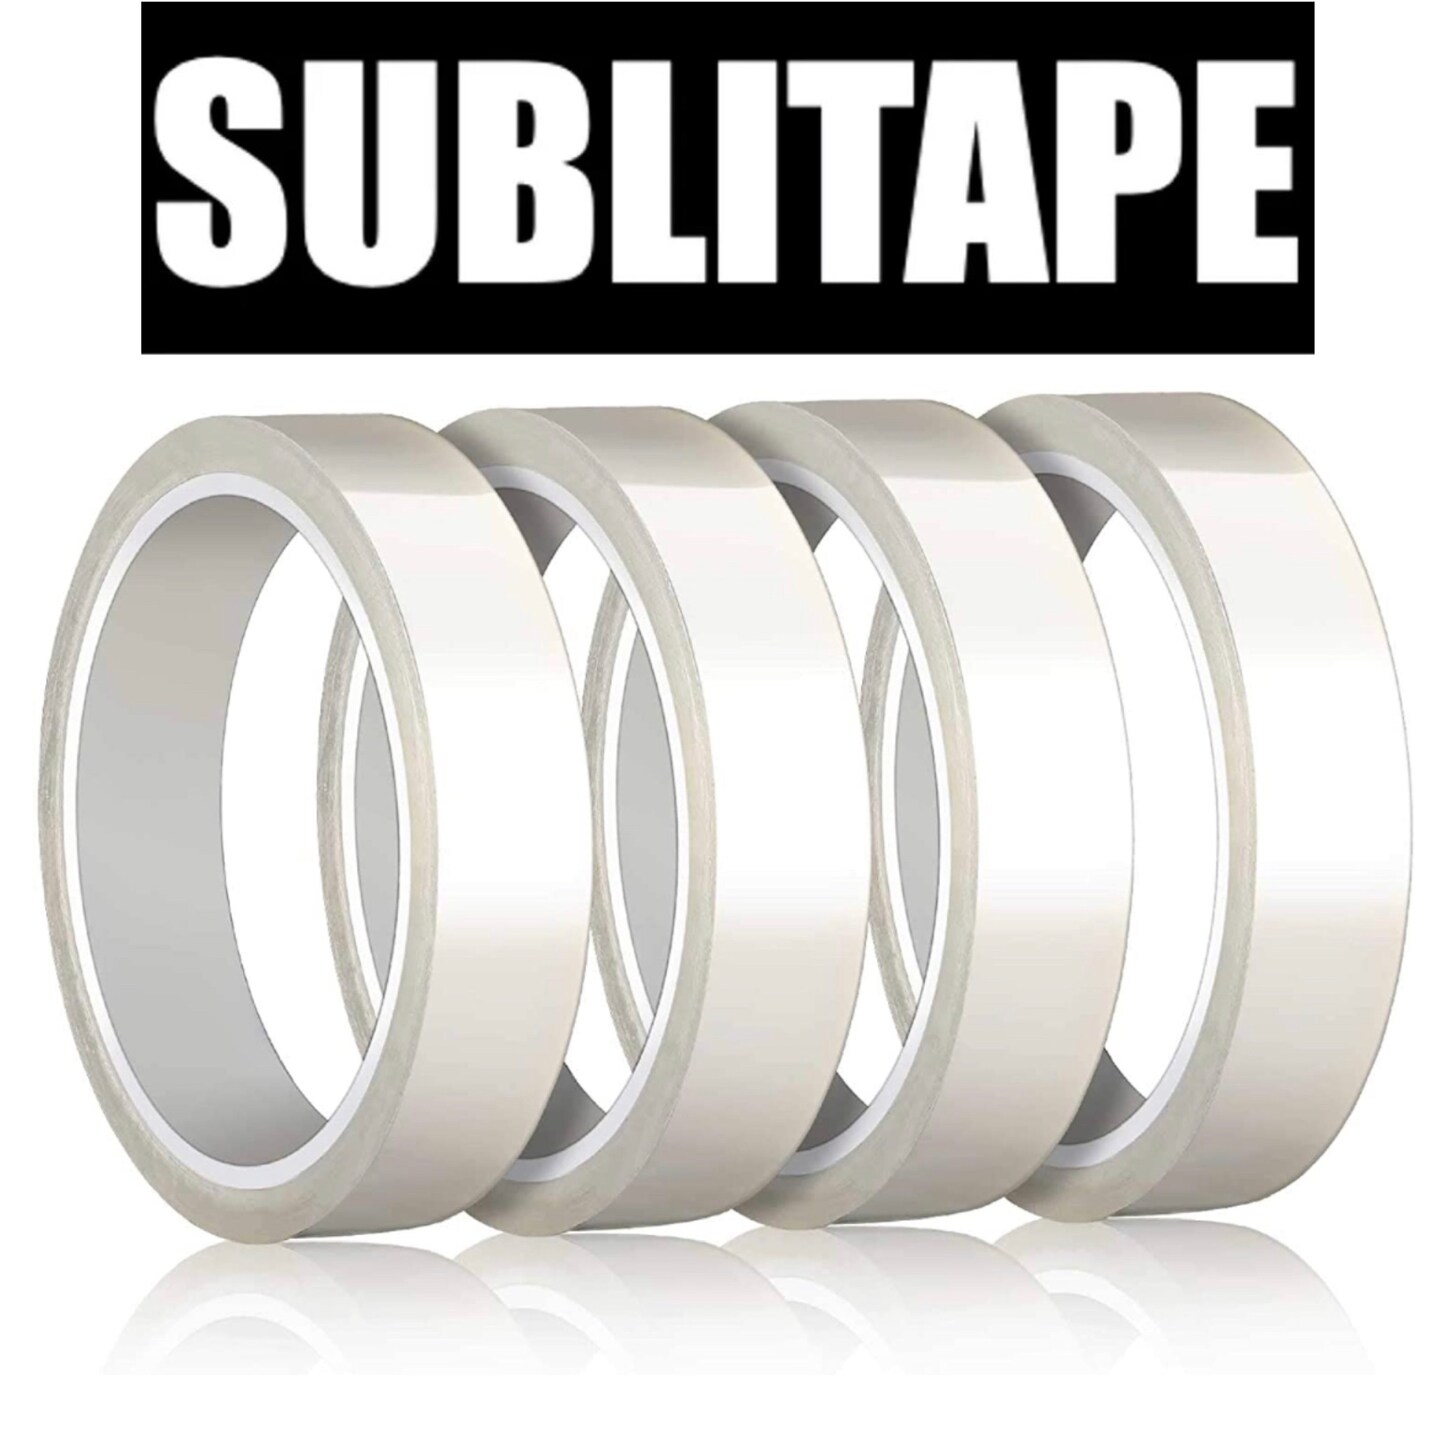 4 rolls Heat resistant tapes sublimation Press Transfer Thermal Tape  20mmx30m SUBLITAPE CLEAR